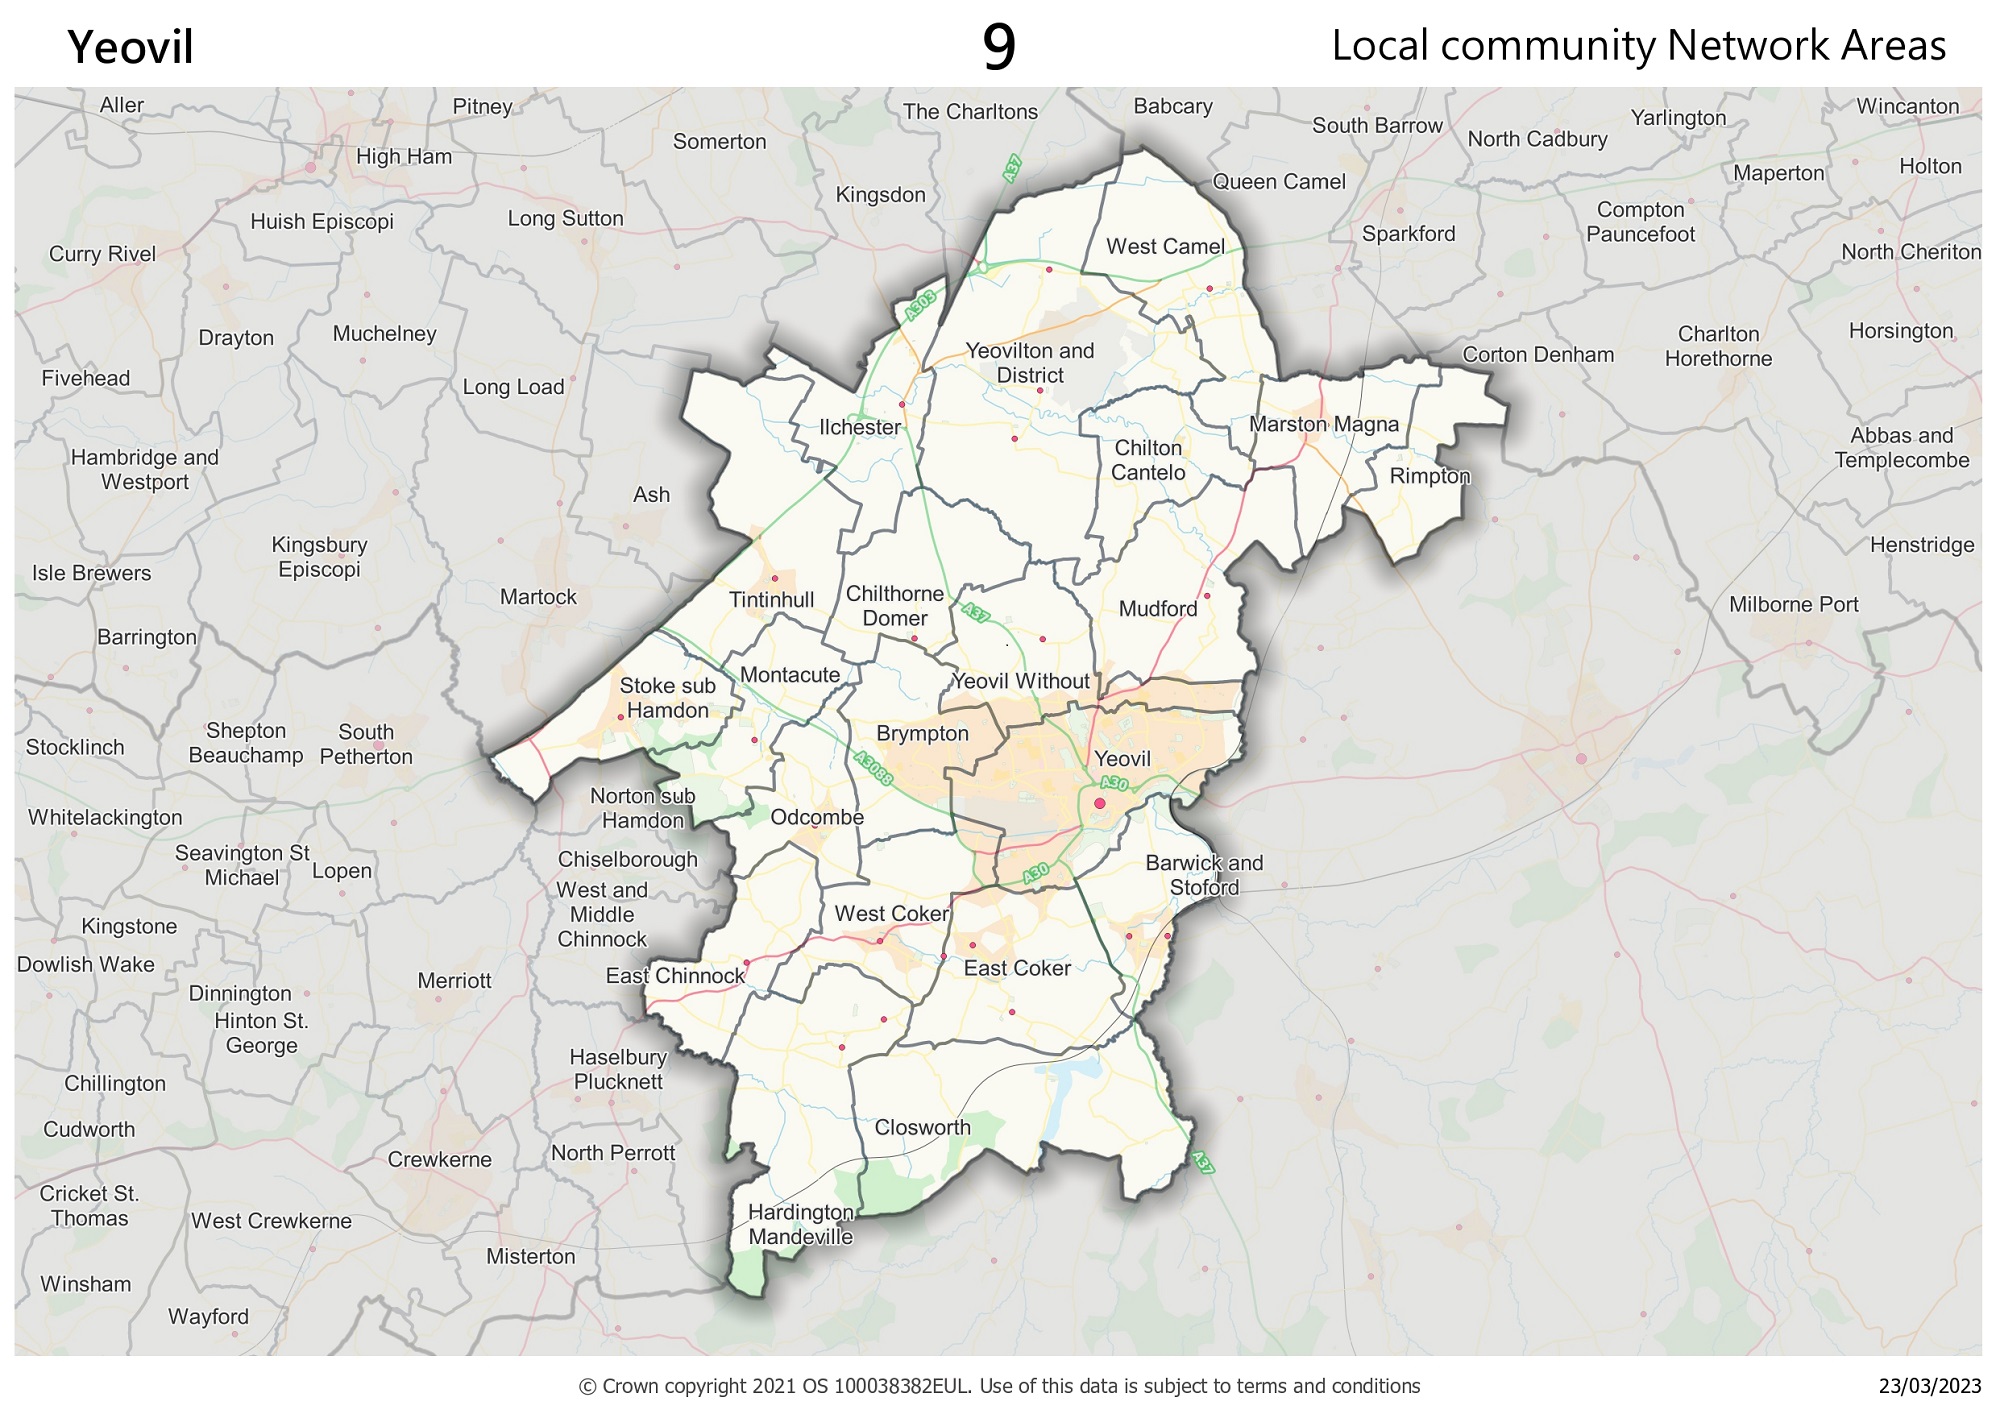 Yeovil local community network area map